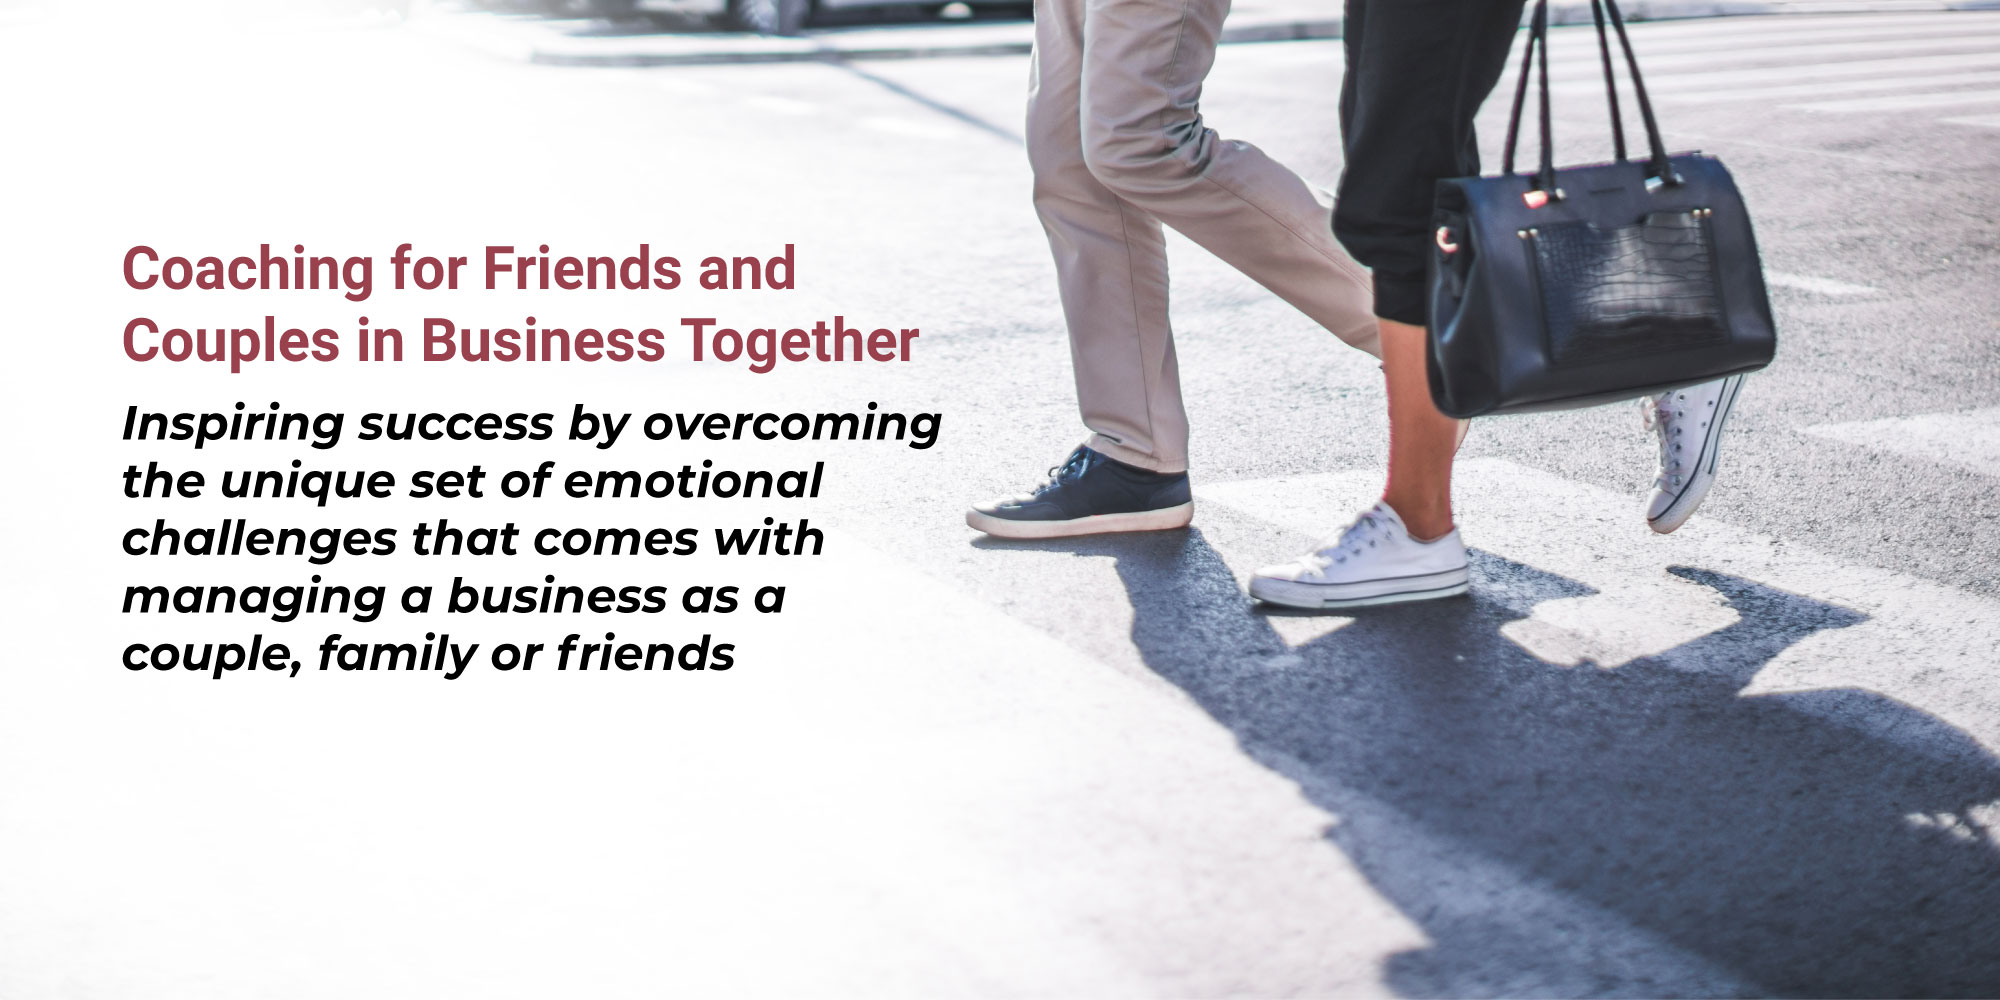 Friends-or-Couples-in-Business-Partnerships-Together-banner